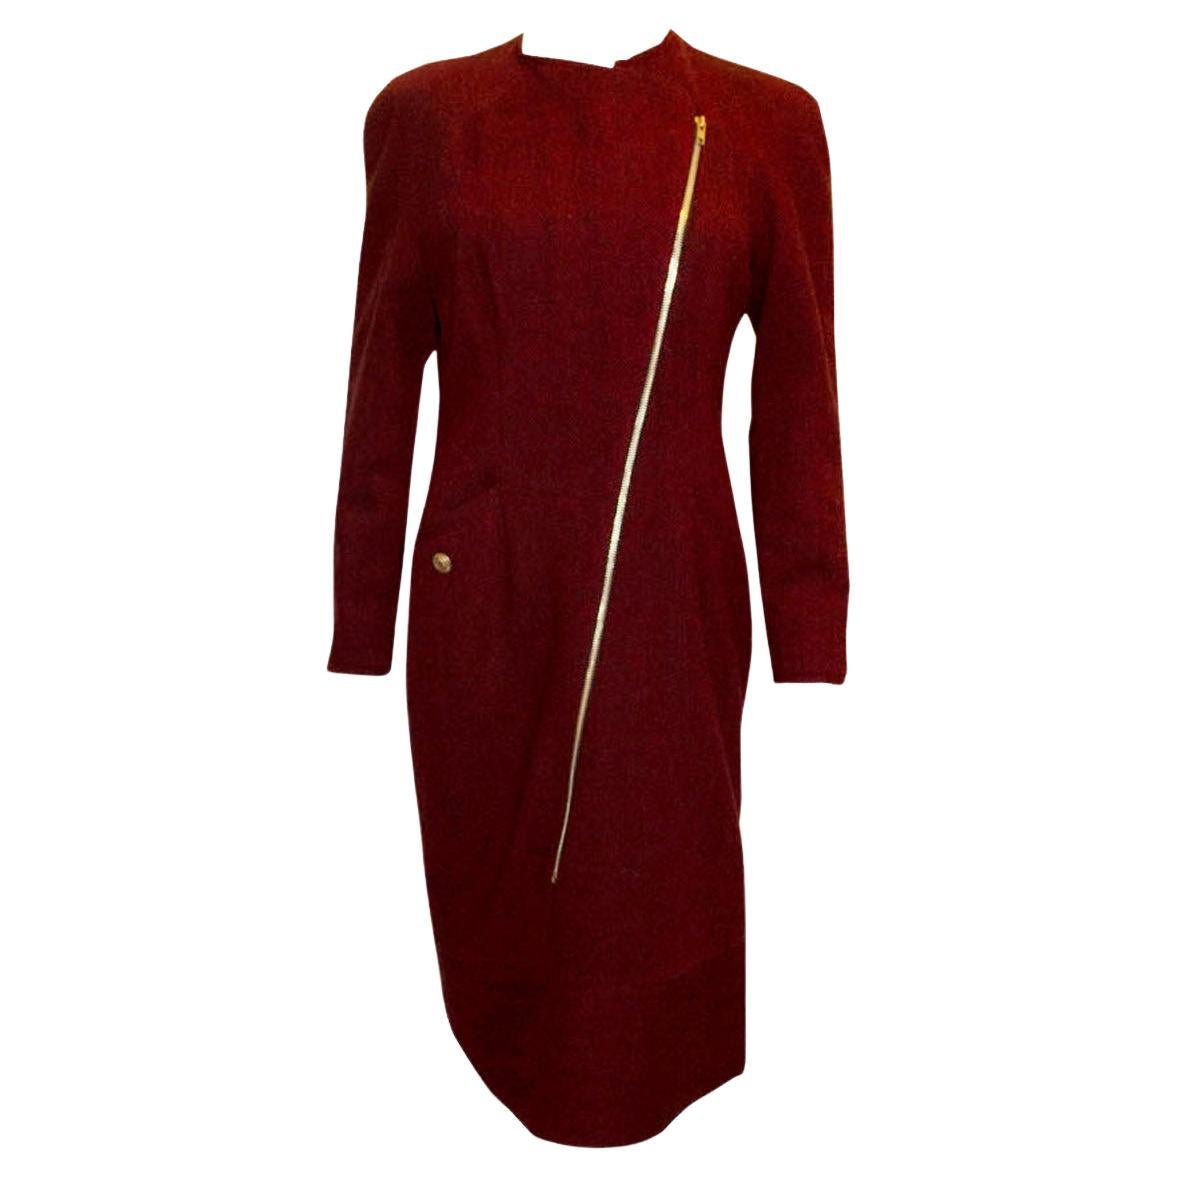 Vtntage Pallant London Red and Black Wool Coat Dress For Sale